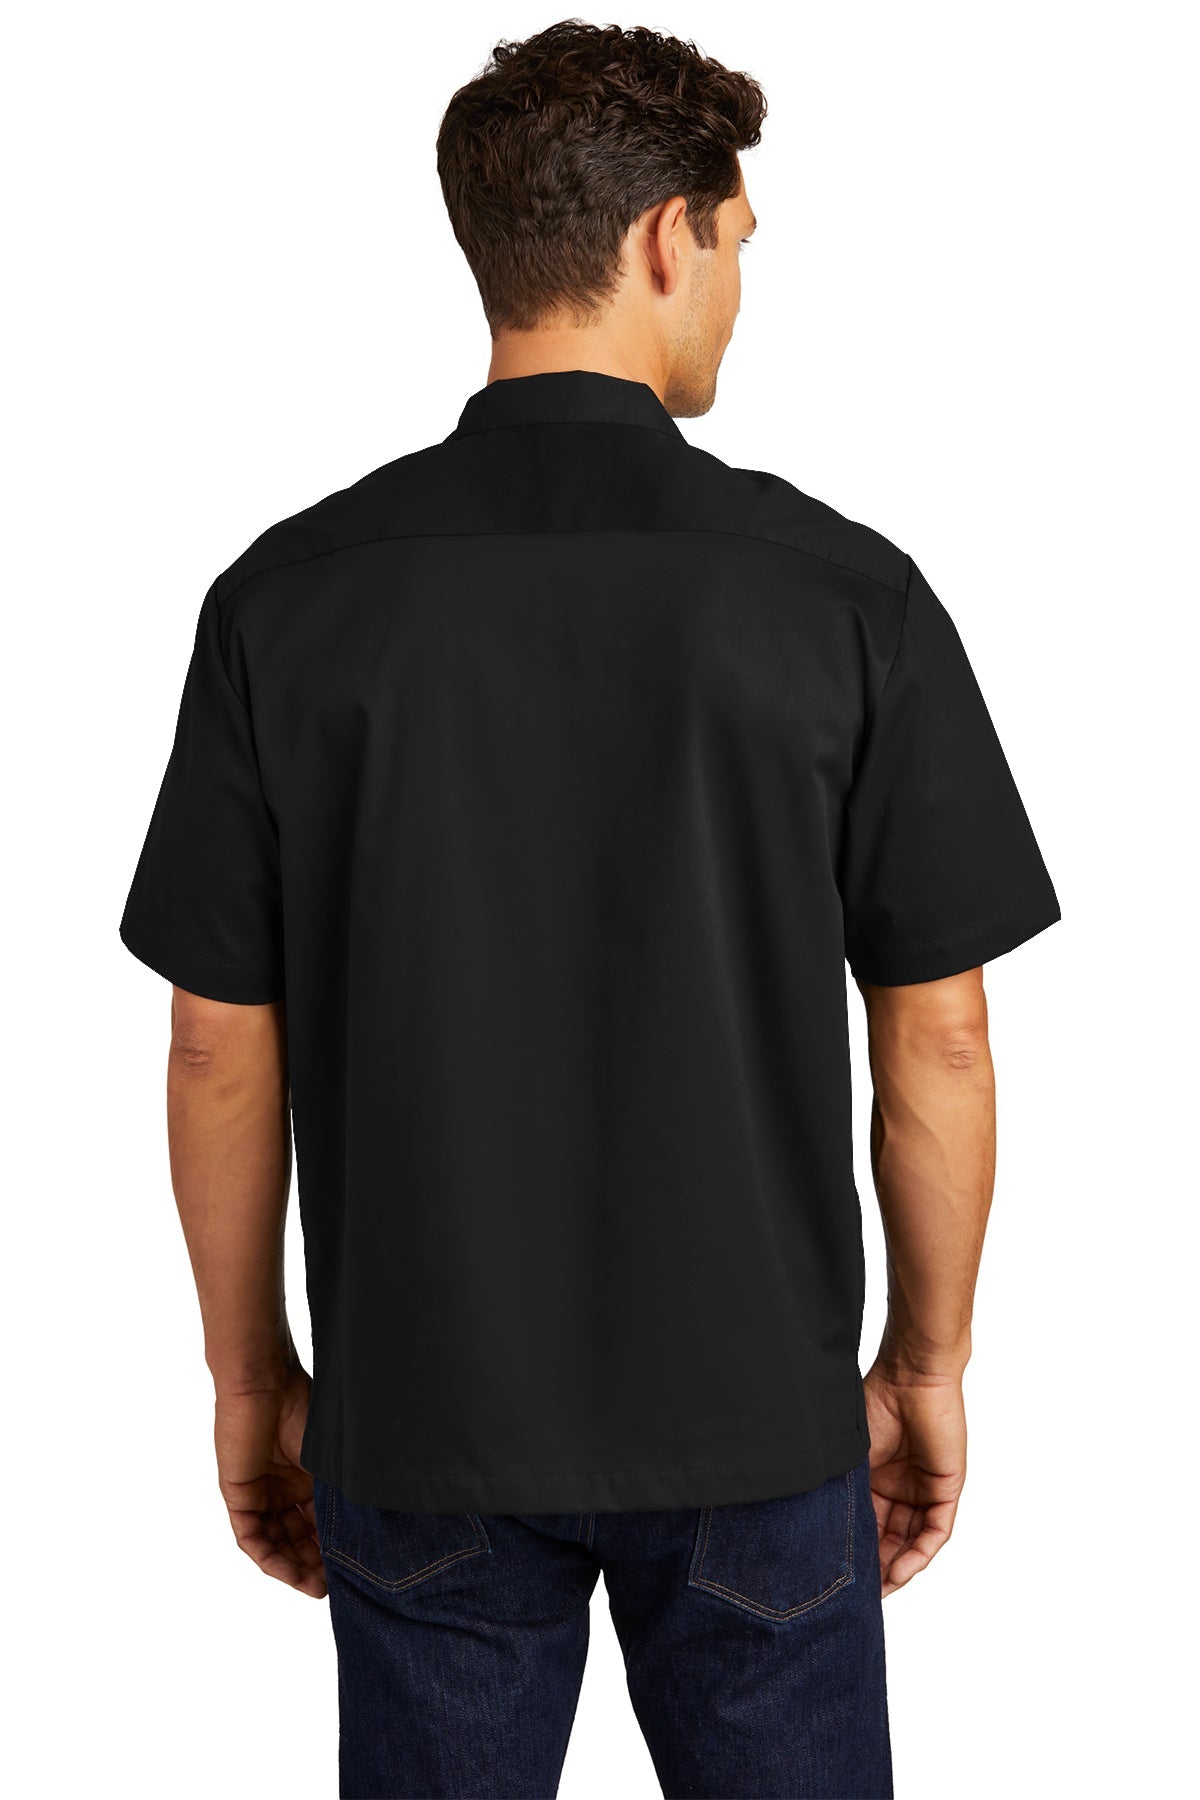 port authority_s300 _black/red_company_logo_button downs